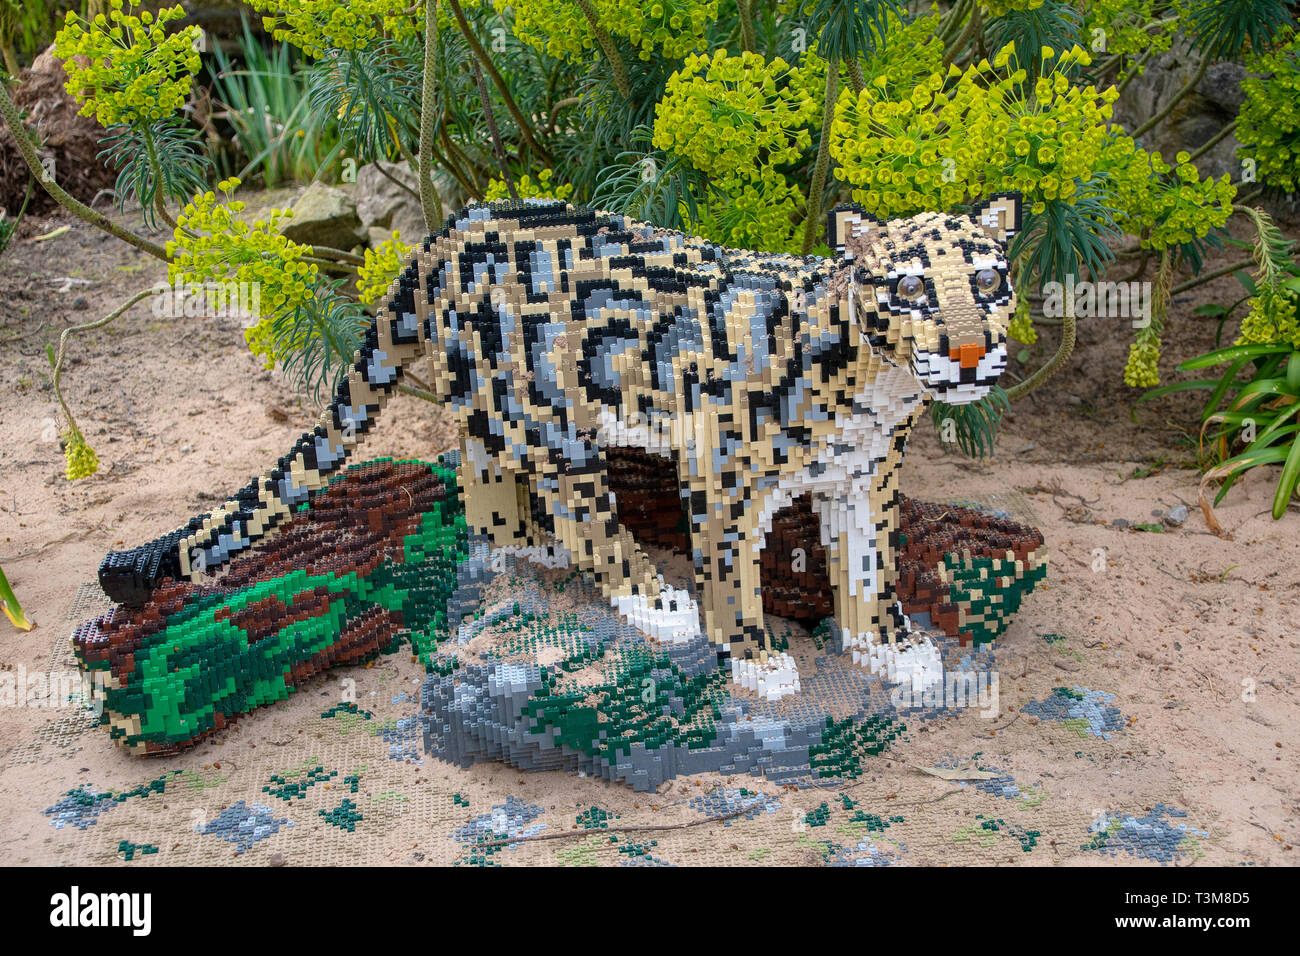 CHESTER, UNITED KINGDOM - MARCH 27TH 2019: A Clouded Leopard statue made  from Lego bricks Stock Photo - Alamy